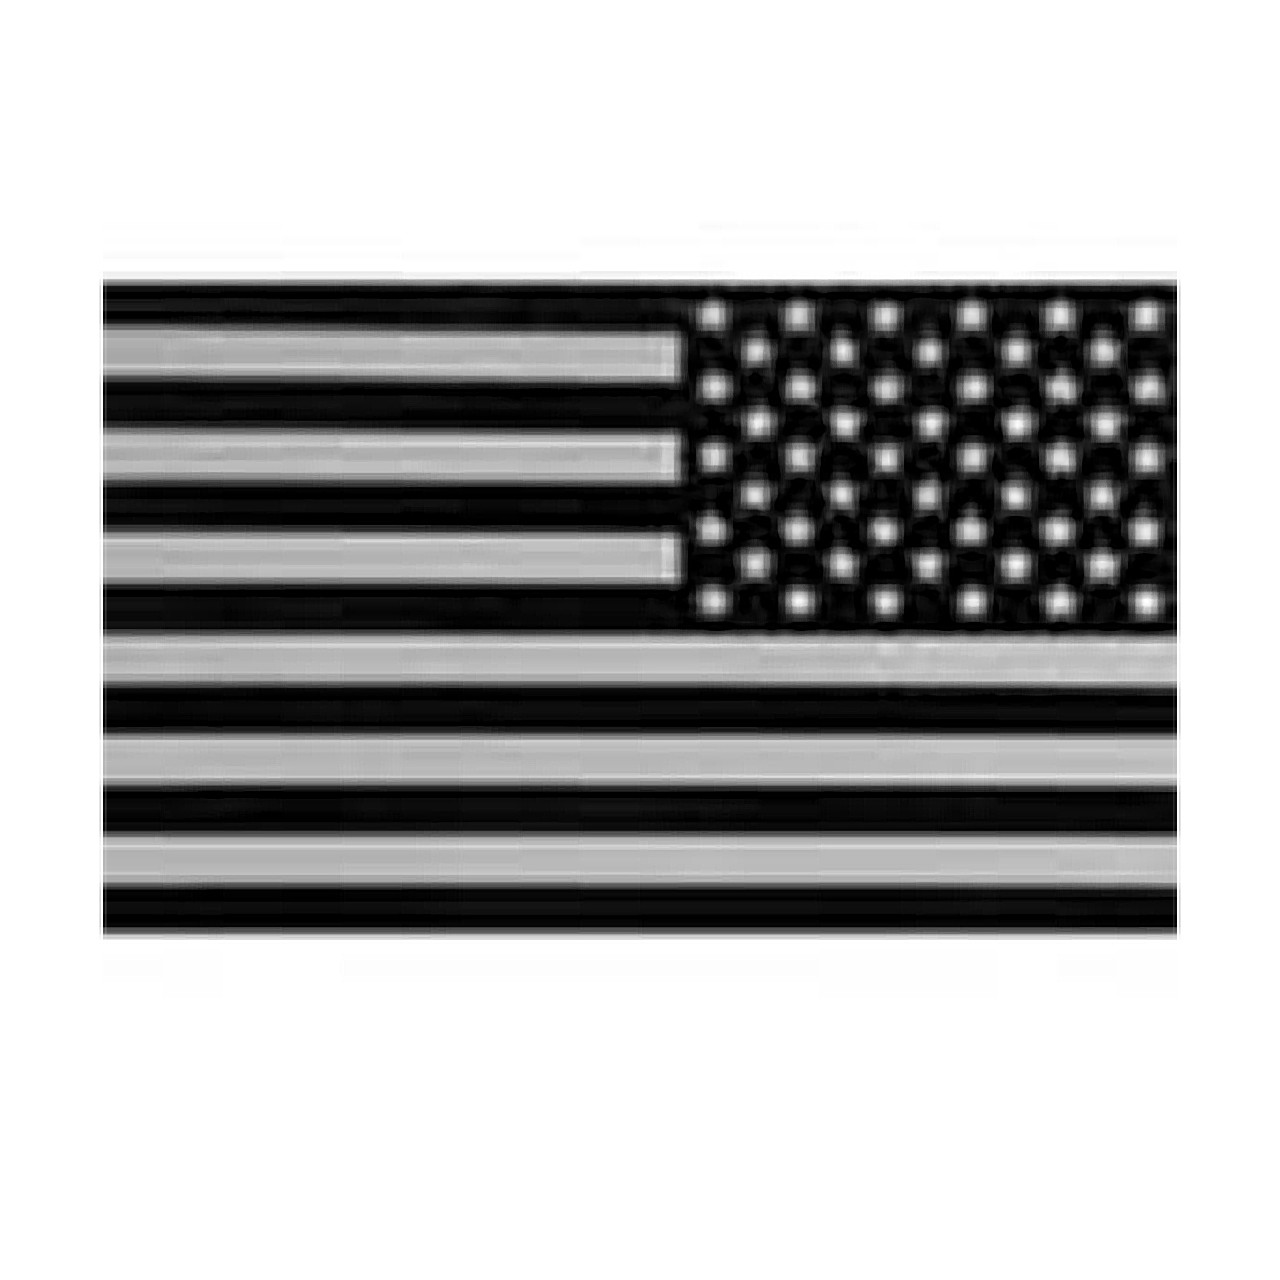 White light Reflective Black and White US Flag patch (reversed or